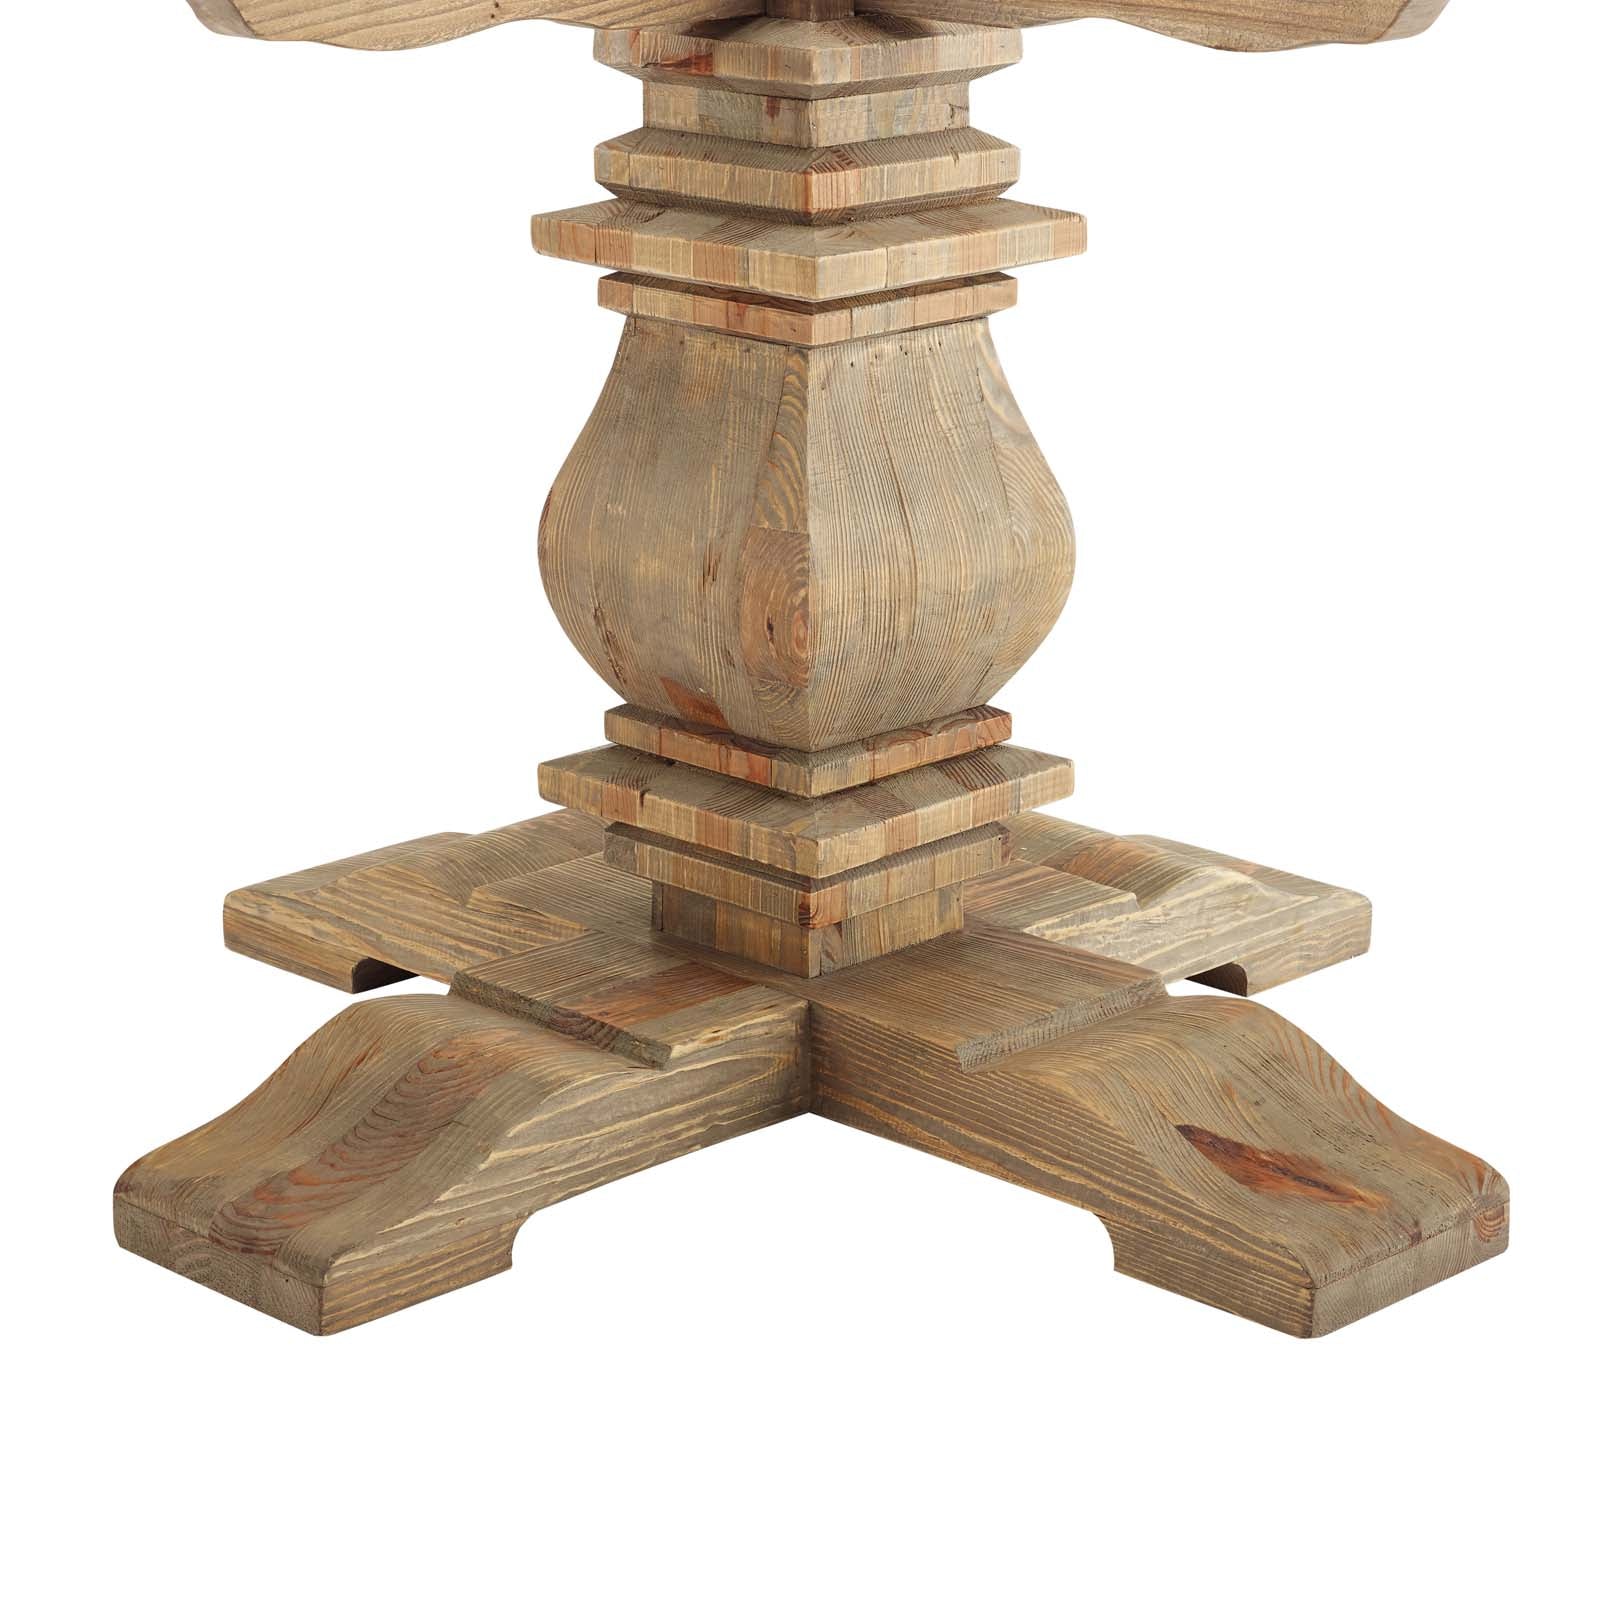 Column 59" Round Pine Wood Dining Table - East Shore Modern Home Furnishings